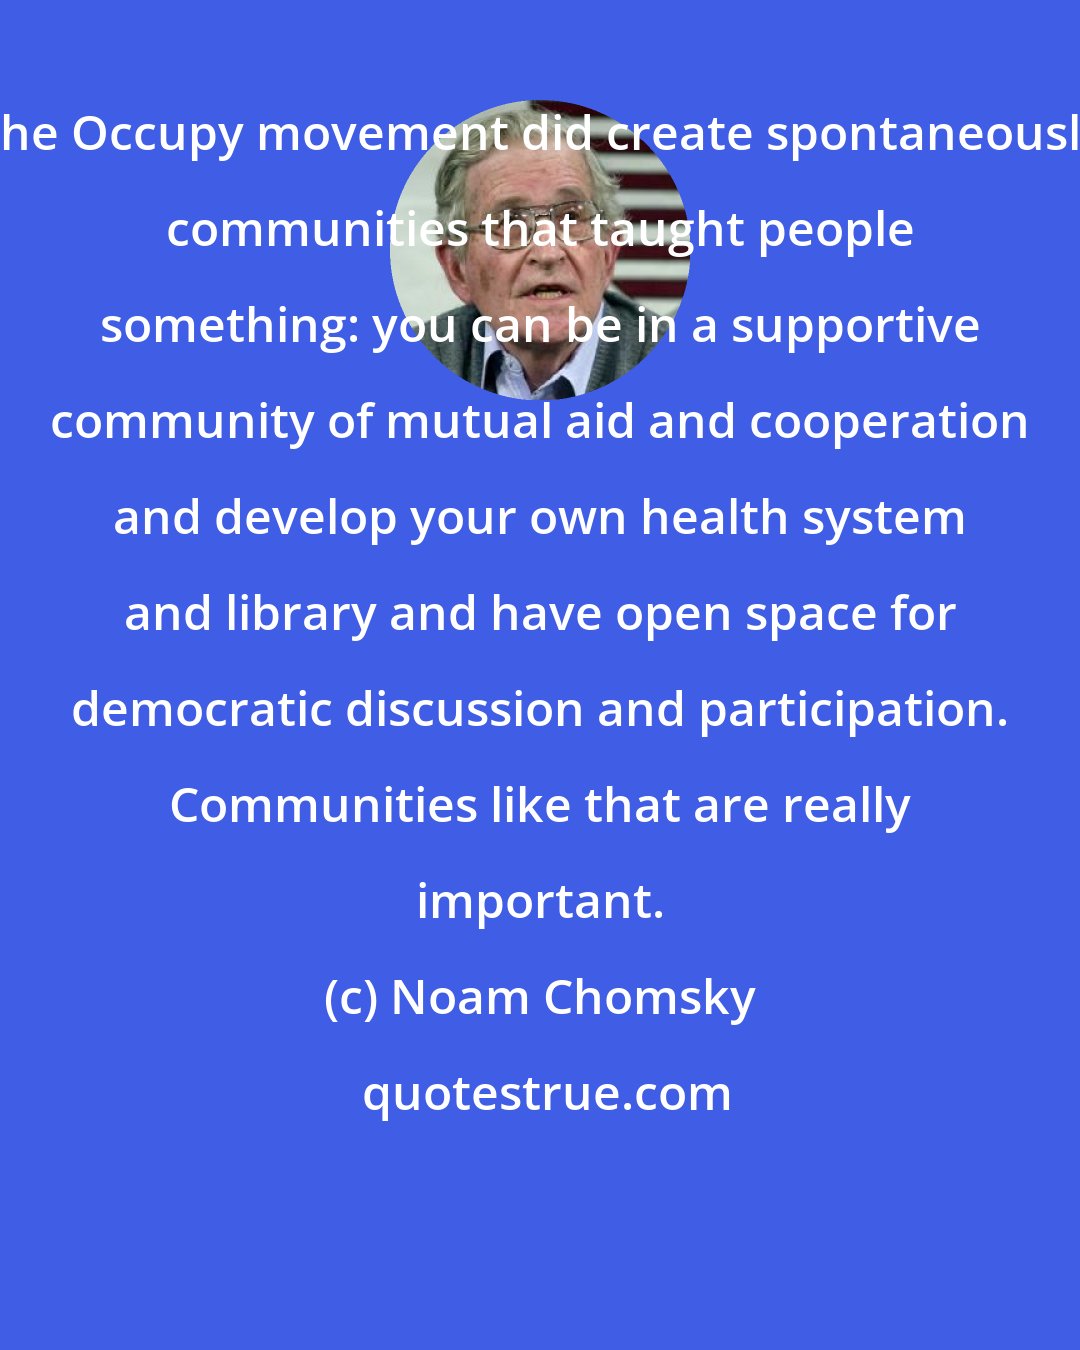 Noam Chomsky: The Occupy movement did create spontaneously communities that taught people something: you can be in a supportive community of mutual aid and cooperation and develop your own health system and library and have open space for democratic discussion and participation. Communities like that are really important.